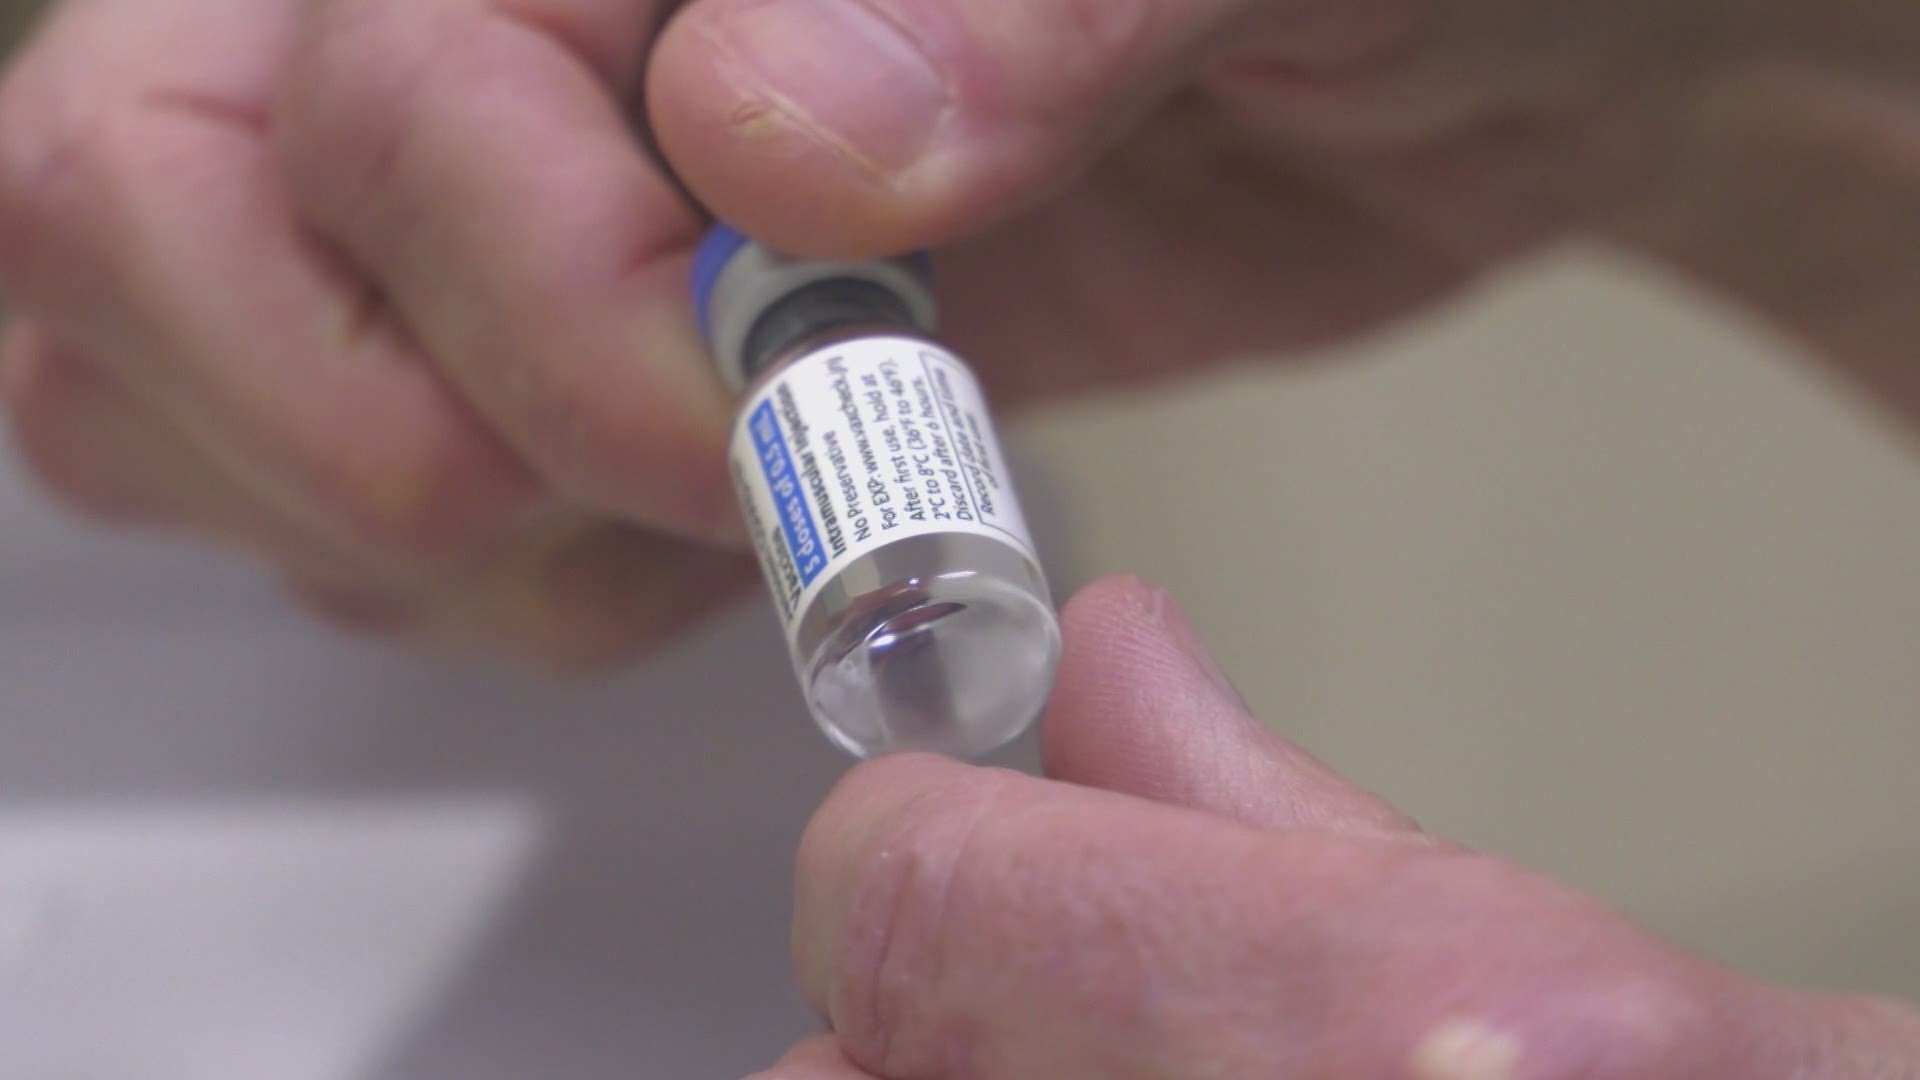 The Johnson & Johnson COVID-19 vaccine represents about 5% of doses administered in Snohomish County so far.